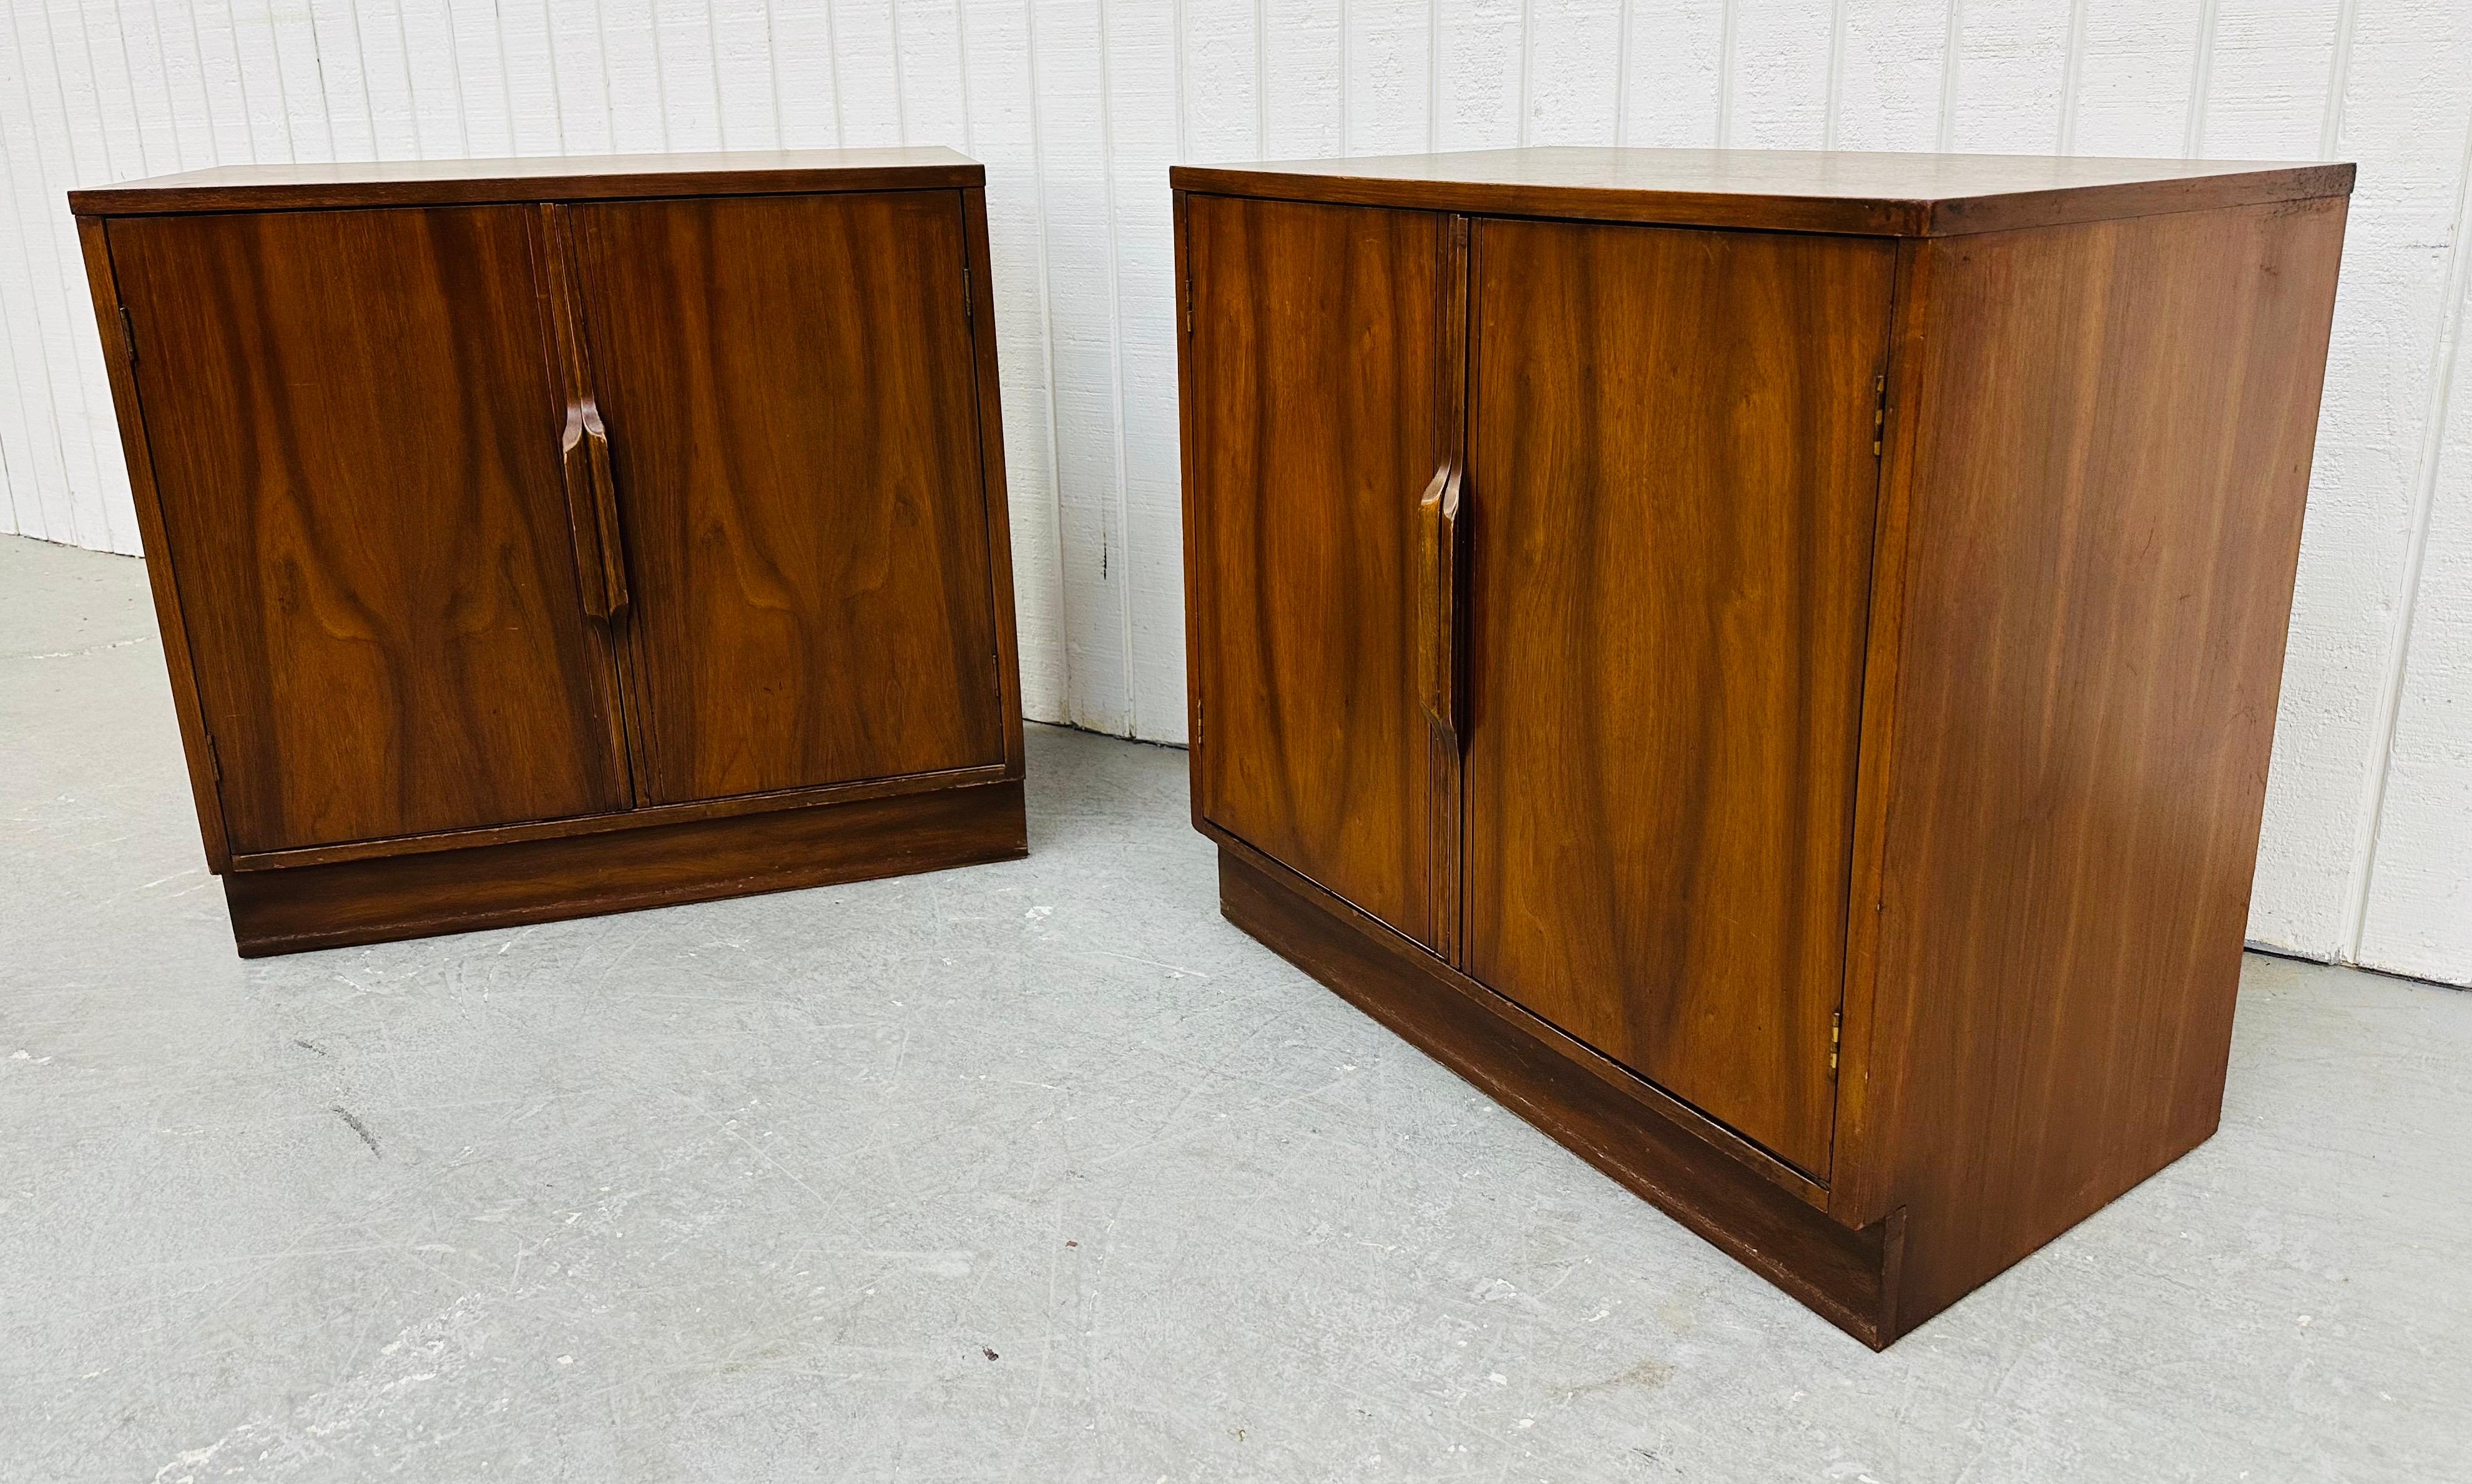 This listing is for a pair of Mid-Century Modern Walnut Storage Cabinets. Featuring a straight line design, two doors with wooden pulls that open up to storage space, plinth base, and a beautiful walnut finish! This is an exceptional combination of